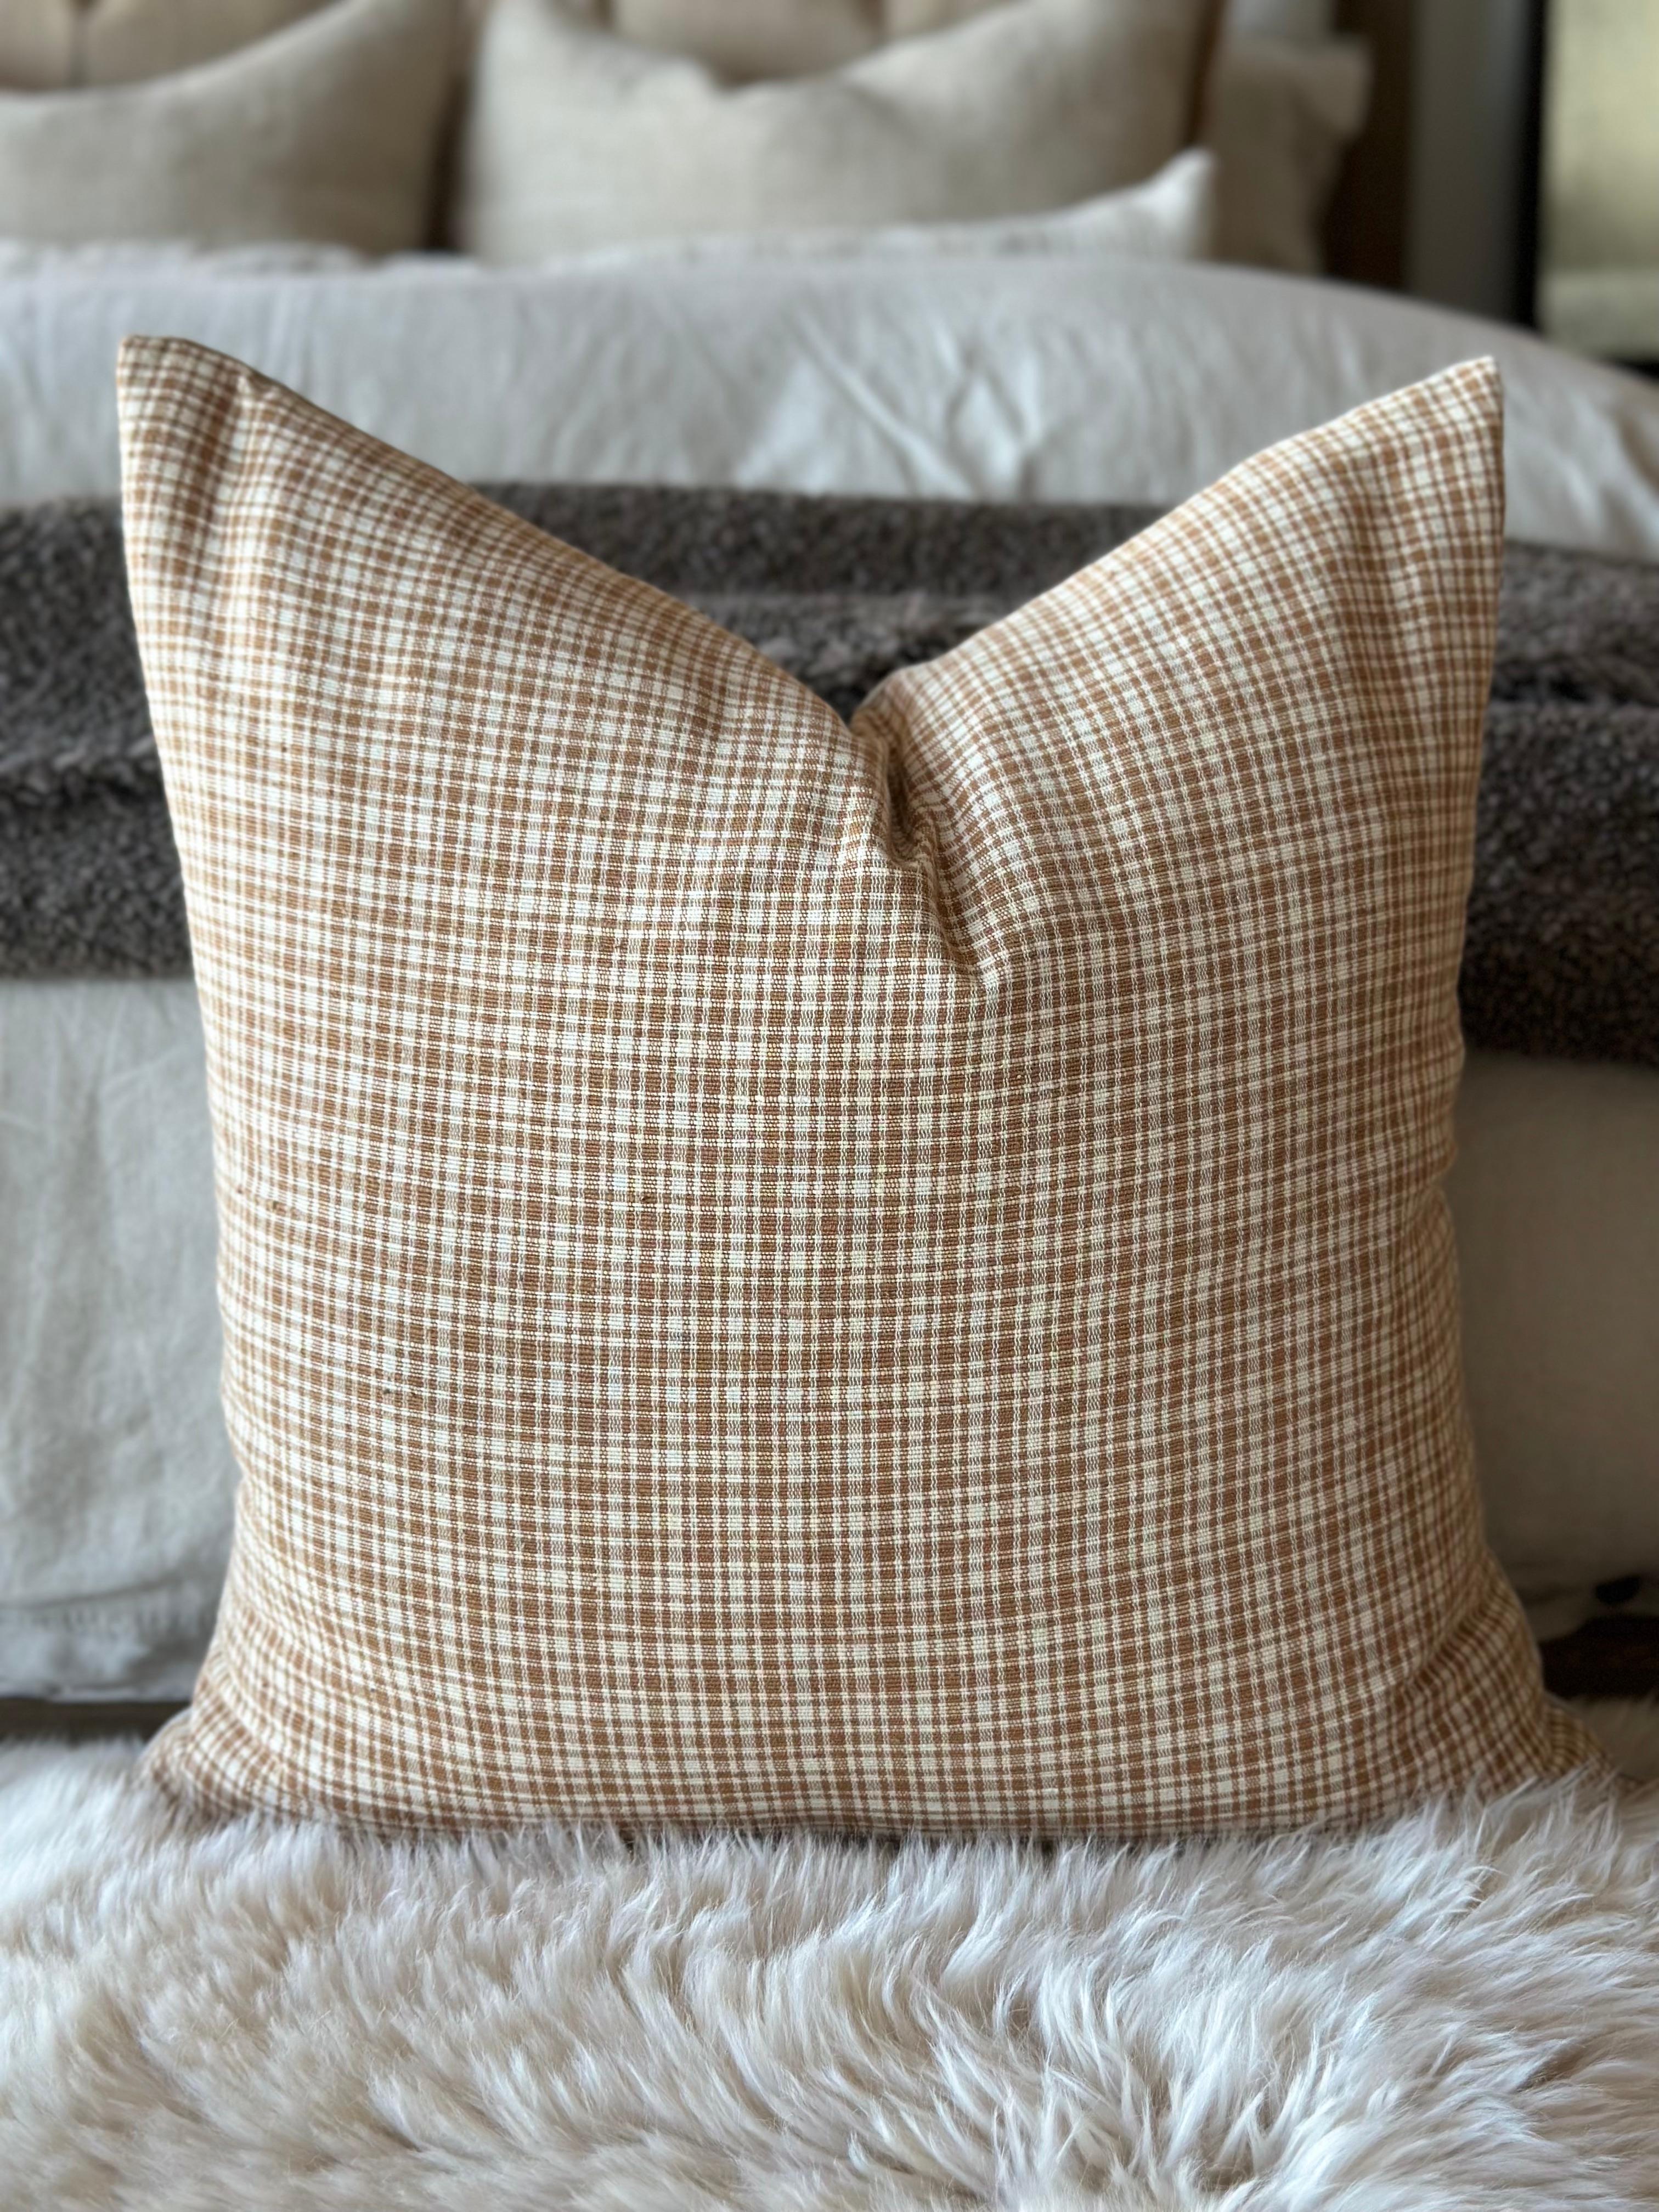 Tiburon Woven Brown Plaid Pillow with Down Feather Insert In New Condition For Sale In Brea, CA